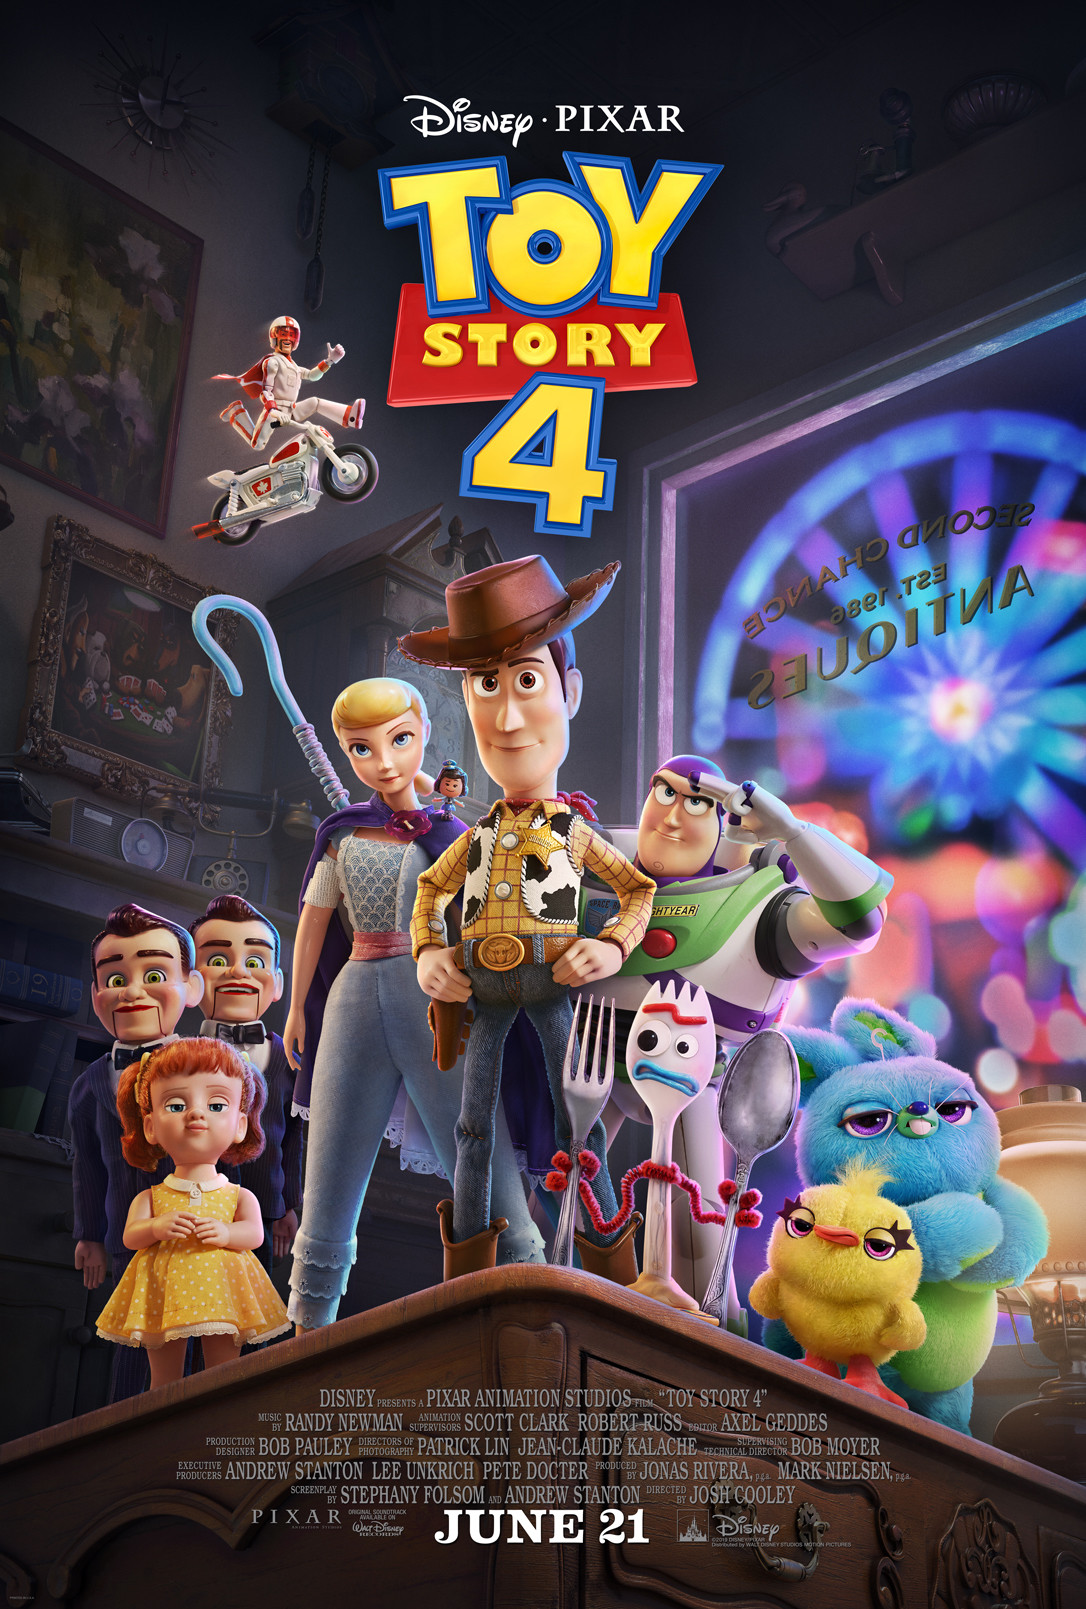 toy story 2 ps3